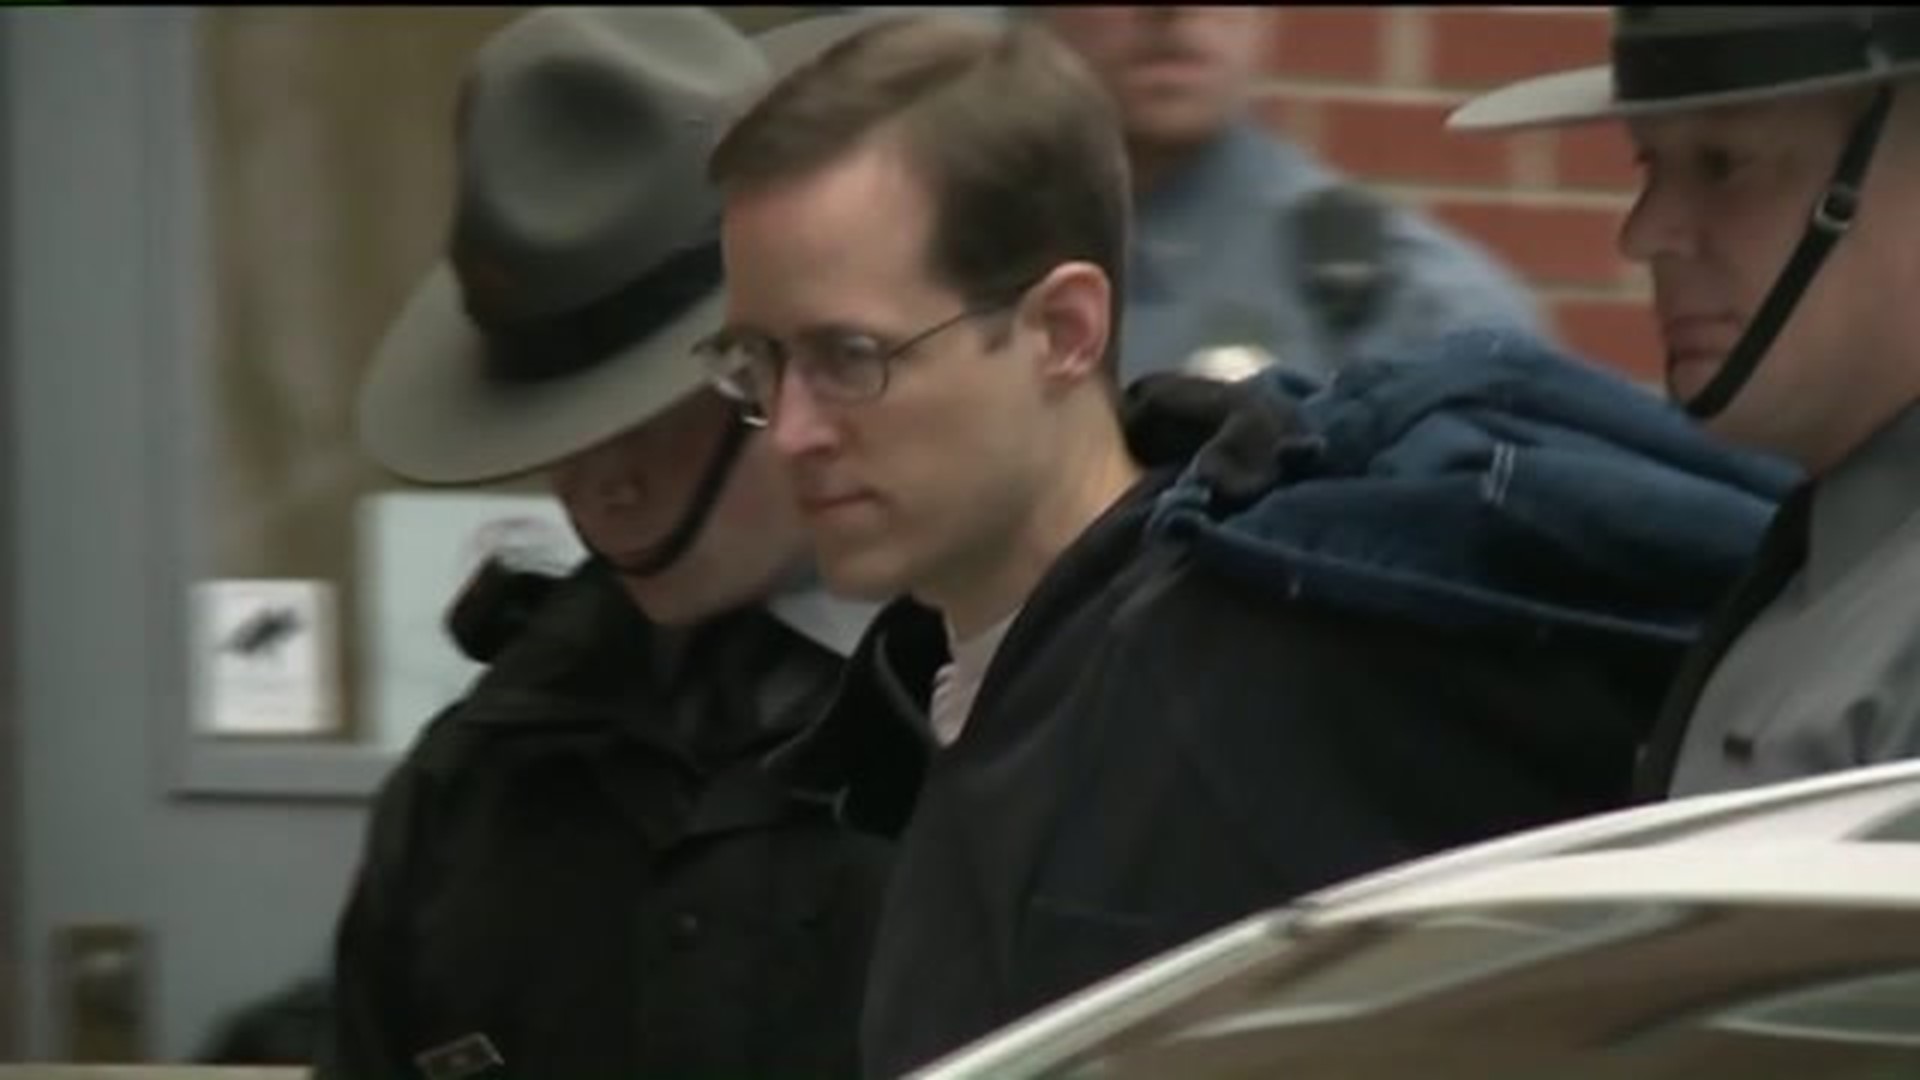 Frein Attorneys Want Evidence, Death Penalty Thrown Out